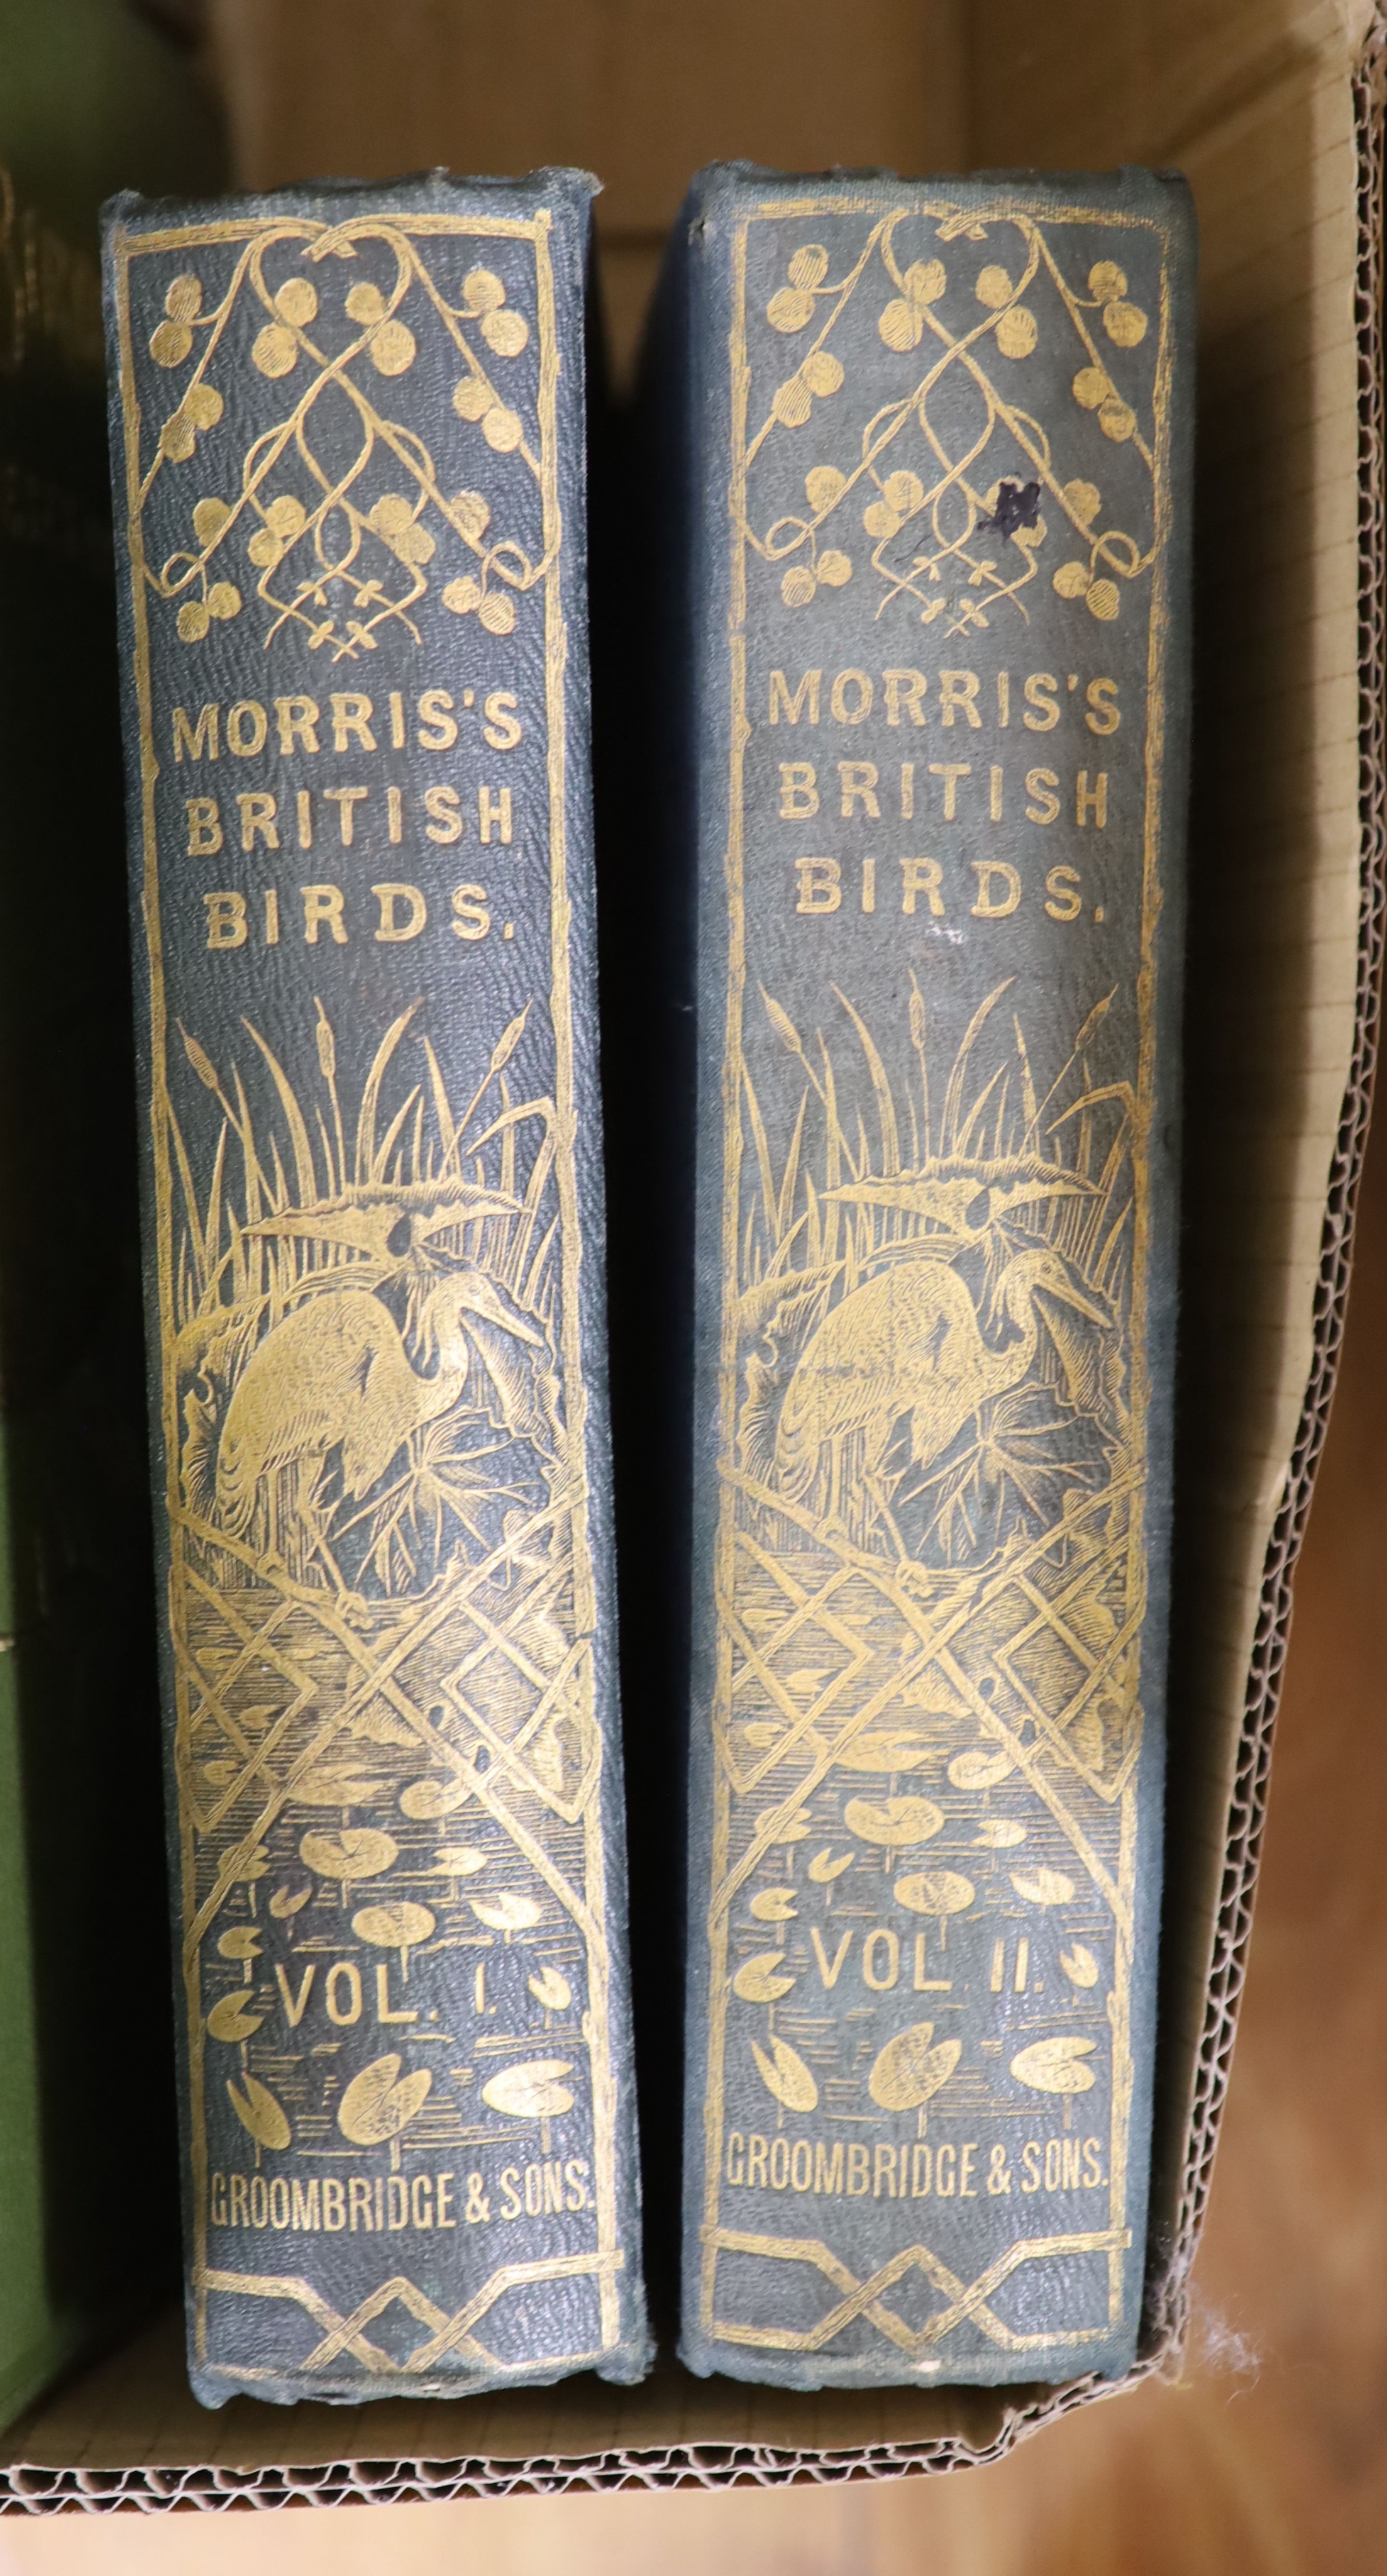 Morris, Rev. Francis Orpen - A History of British Birds. 2nd edition, 2 vols (of 6). Complete with 60 coloured plates to each. Decoratively embossed and panelled cloth boards with gilt pictorial device to upper, the same